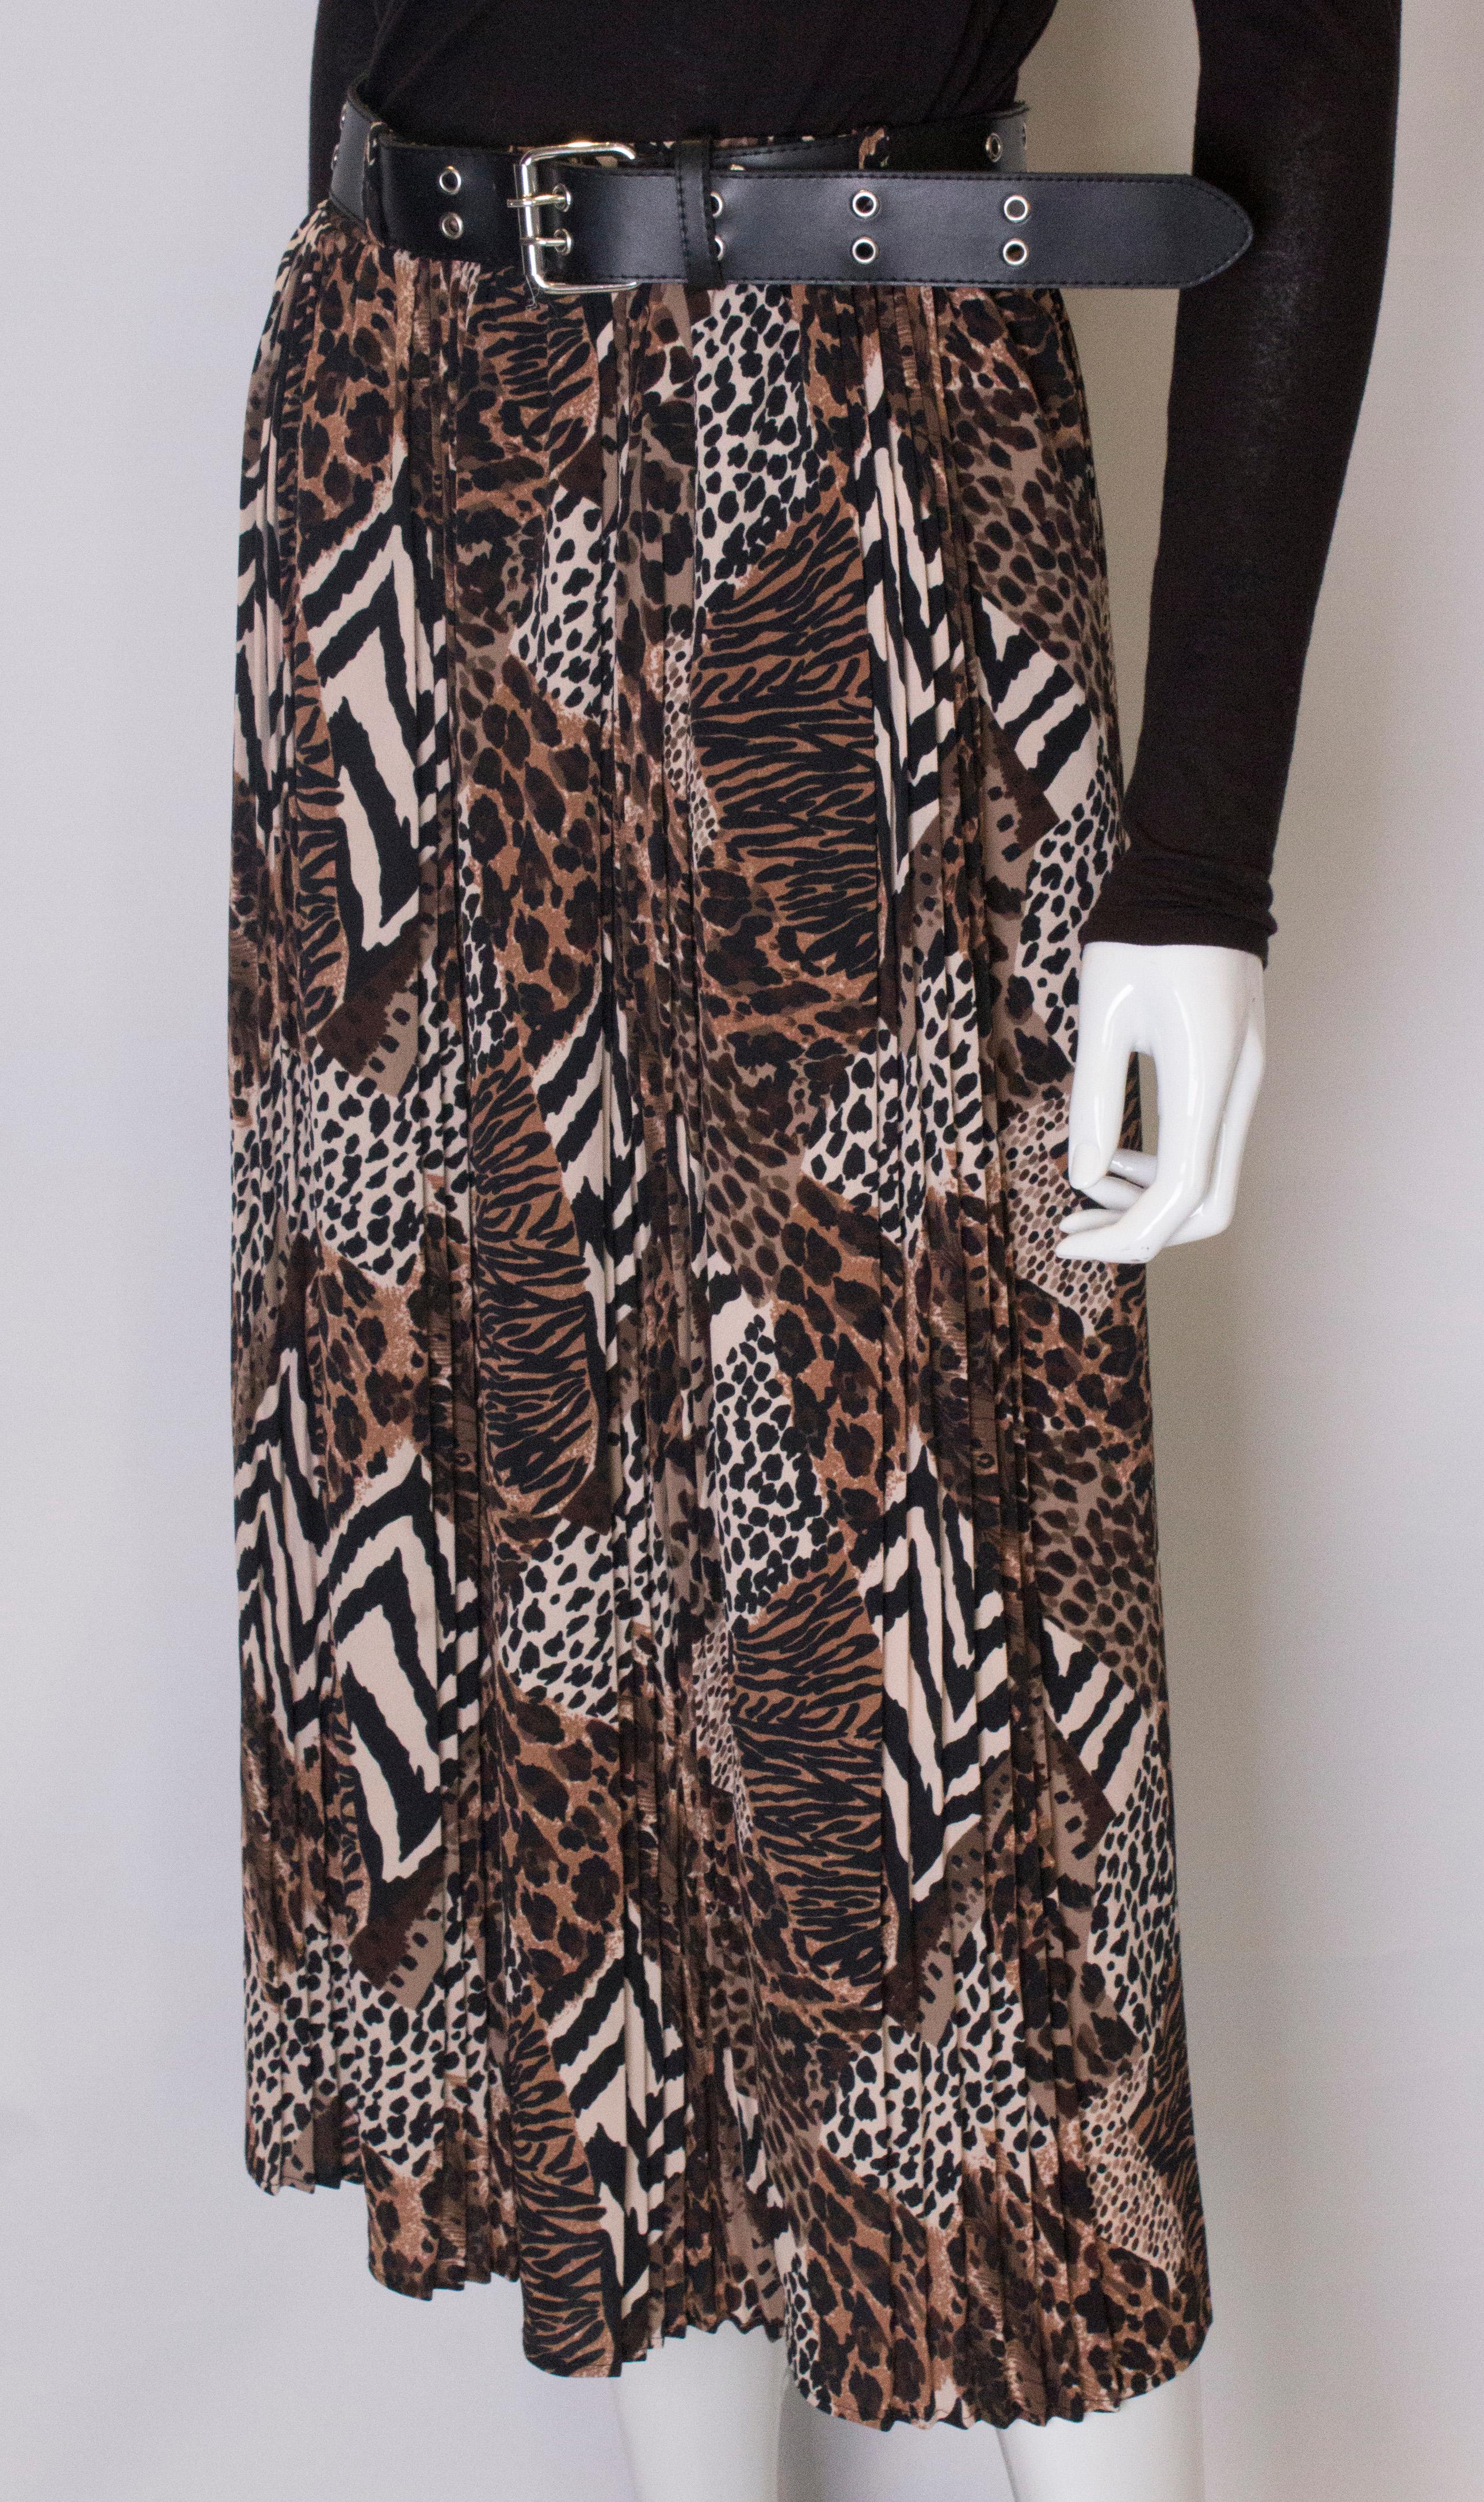 Vintage Leopard Print Skirt with Pleats In Good Condition For Sale In London, GB